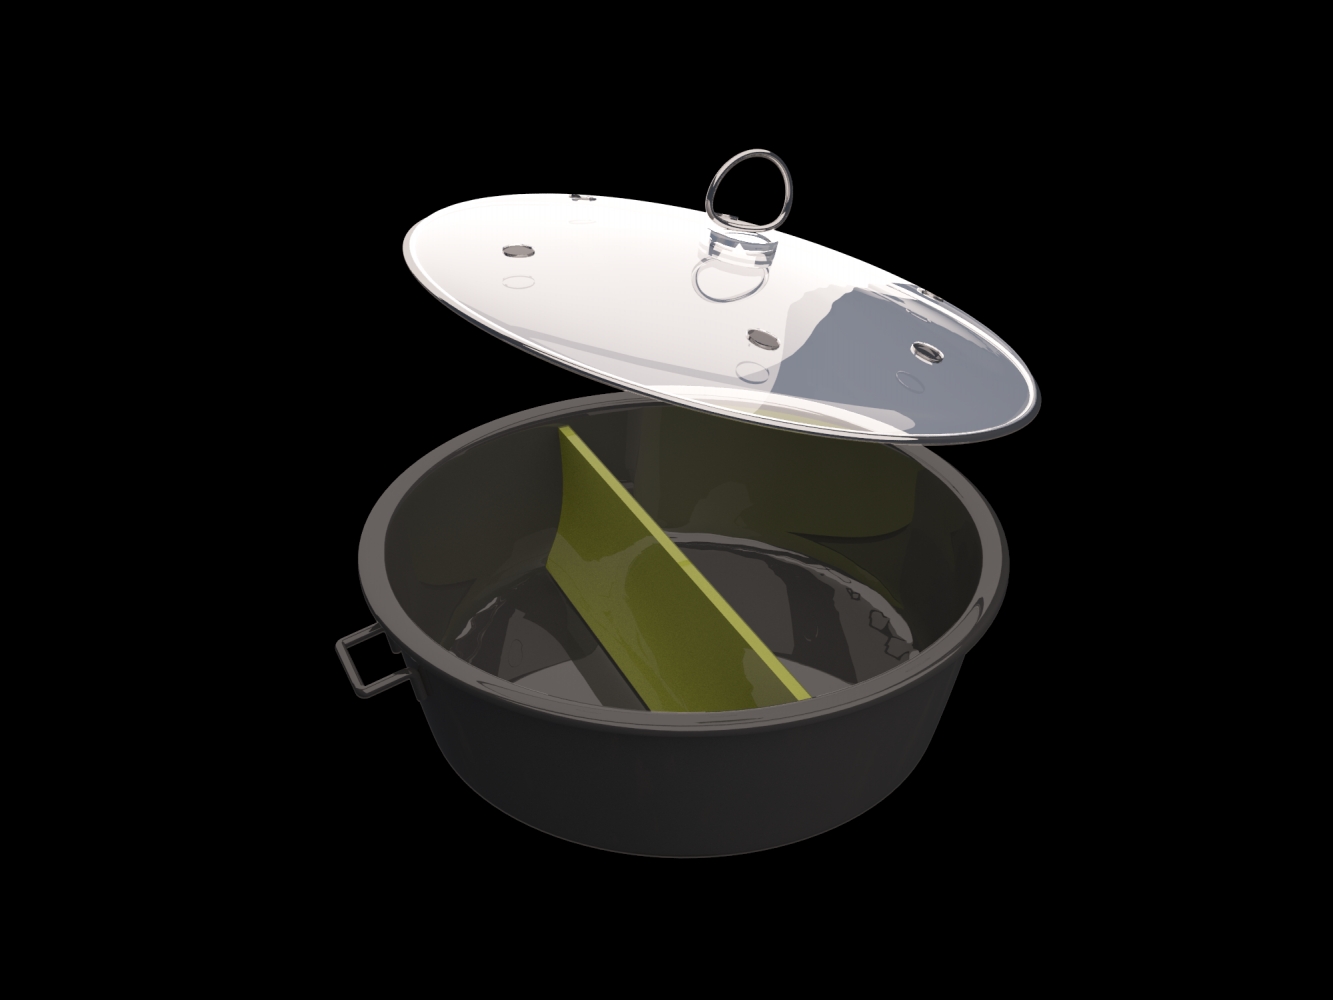 Abby's Kitchenware helps cooking time go by faster, makes food observation easier, and great for space reduction